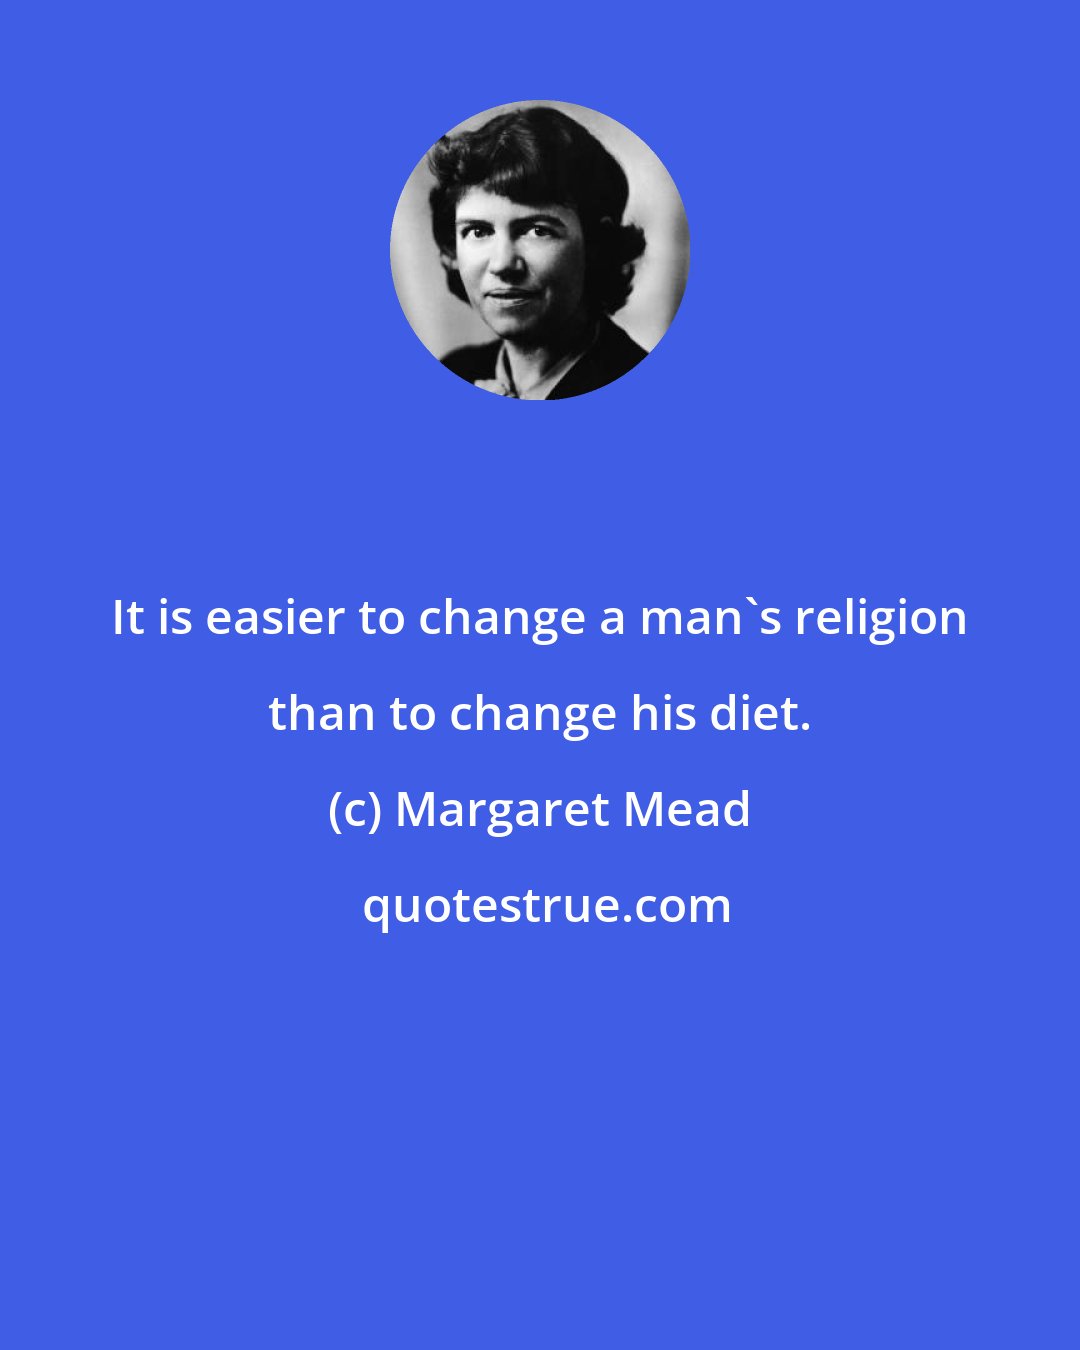 Margaret Mead: It is easier to change a man's religion than to change his diet.